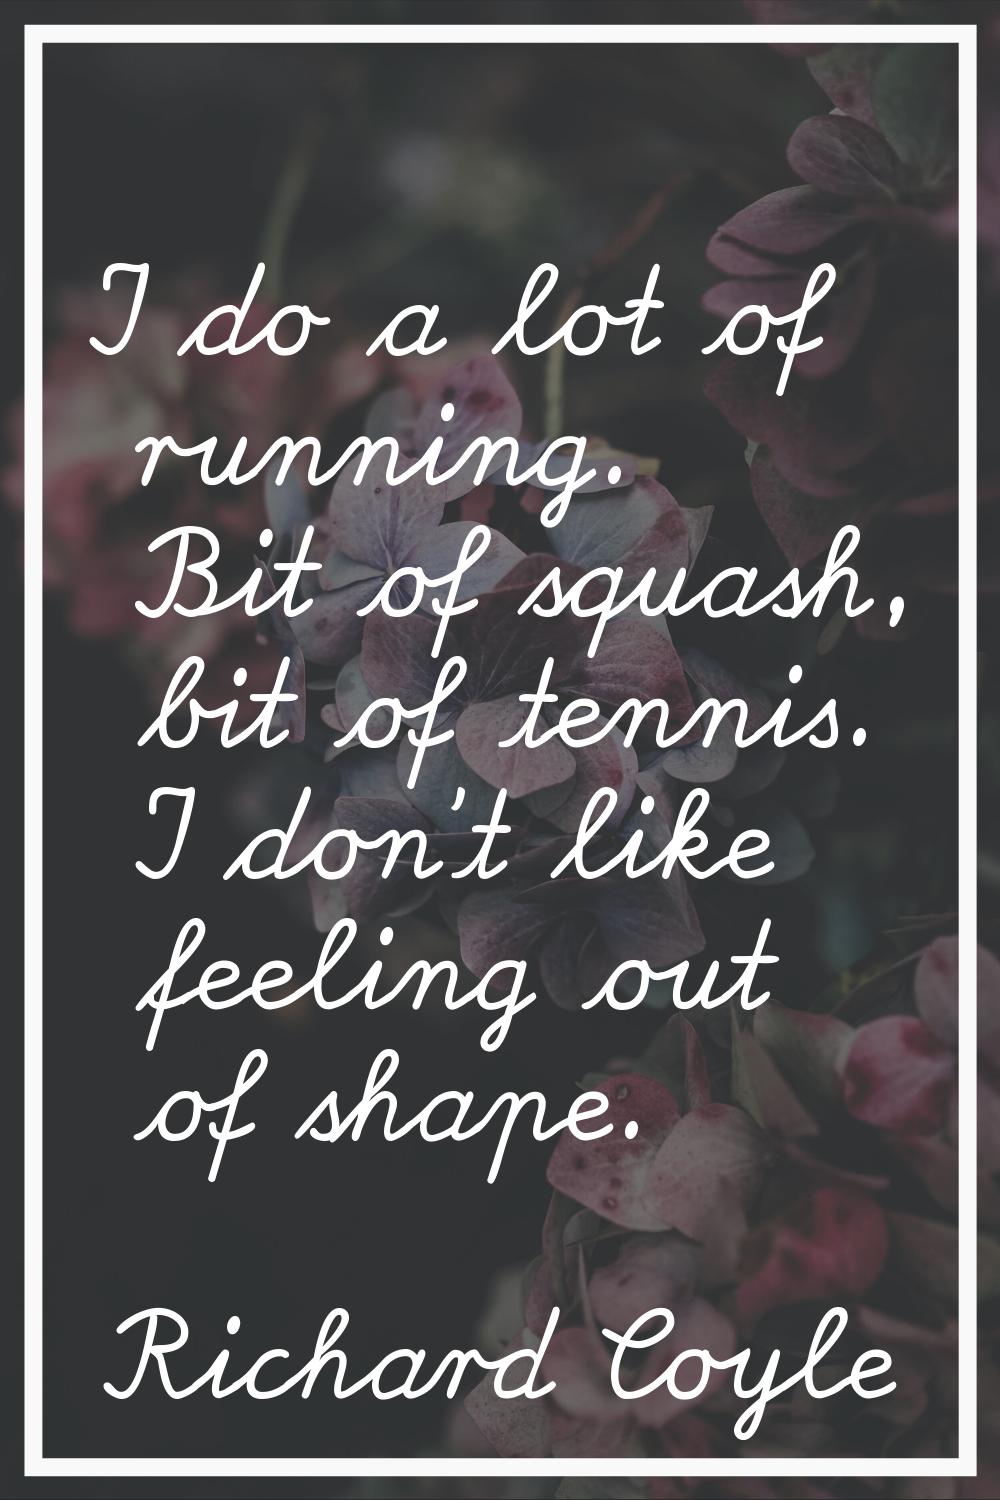 I do a lot of running. Bit of squash, bit of tennis. I don't like feeling out of shape.